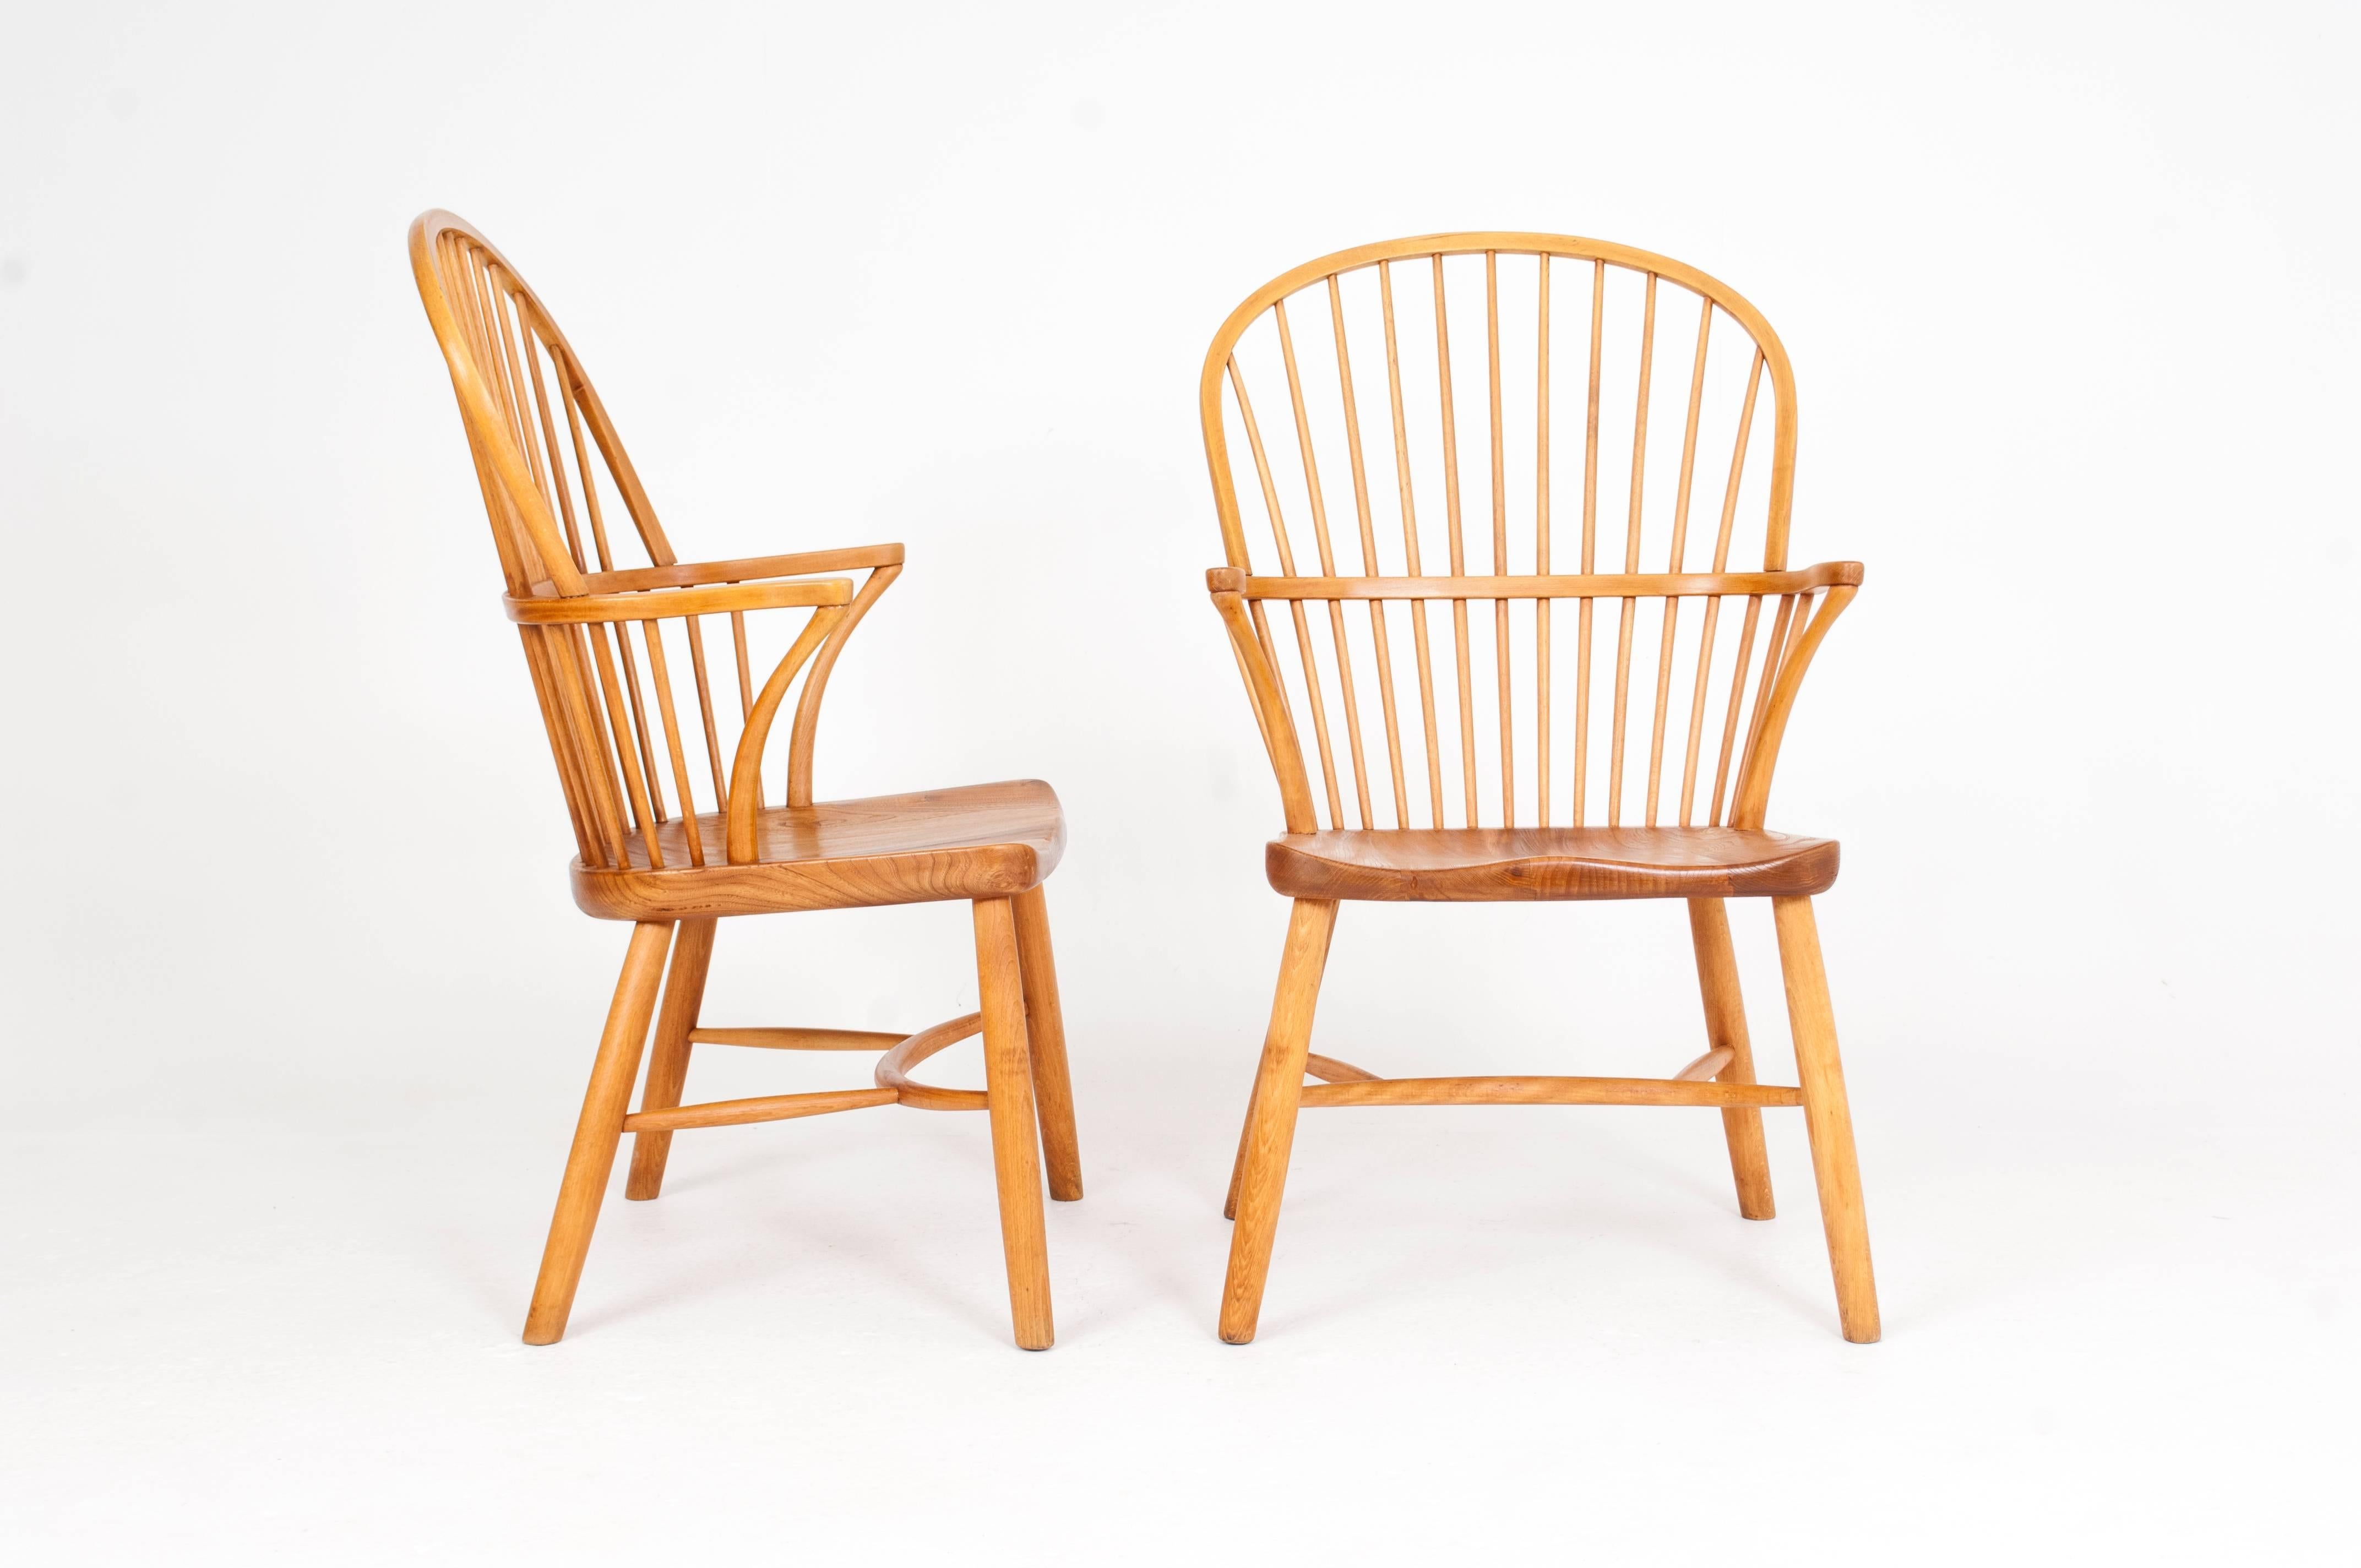 Palle Suenson.

Pair of Windsor chairs in beech and elm.

Designed circa 1945.

Manufactured by Fritz Hansen.